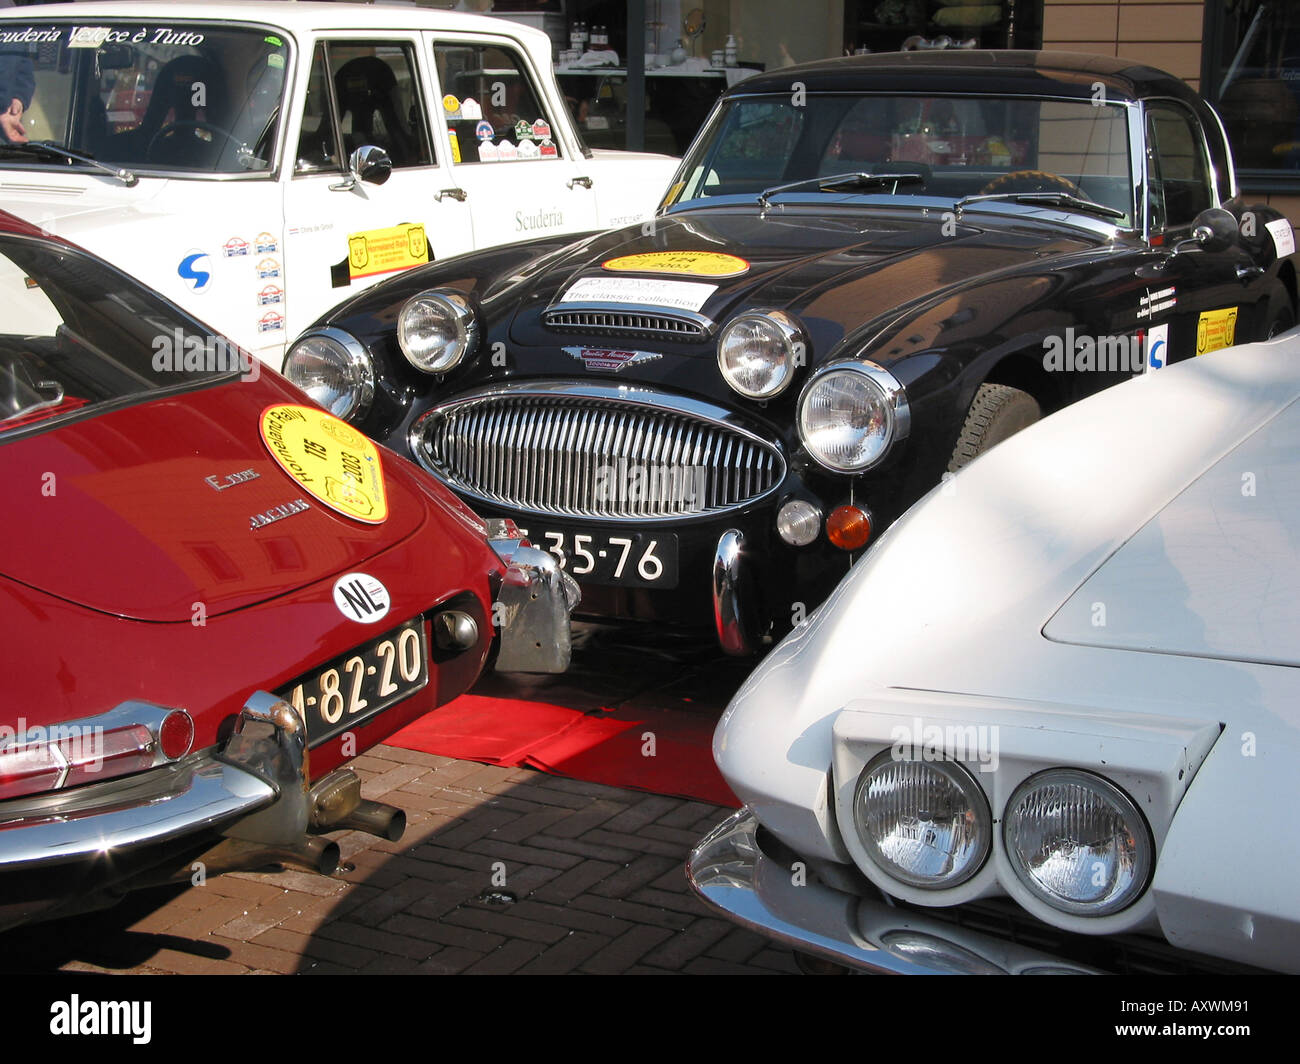 four rally cars in parc ferme at International Horneland Rally a classic car rally in the Netherlands Stock Photo